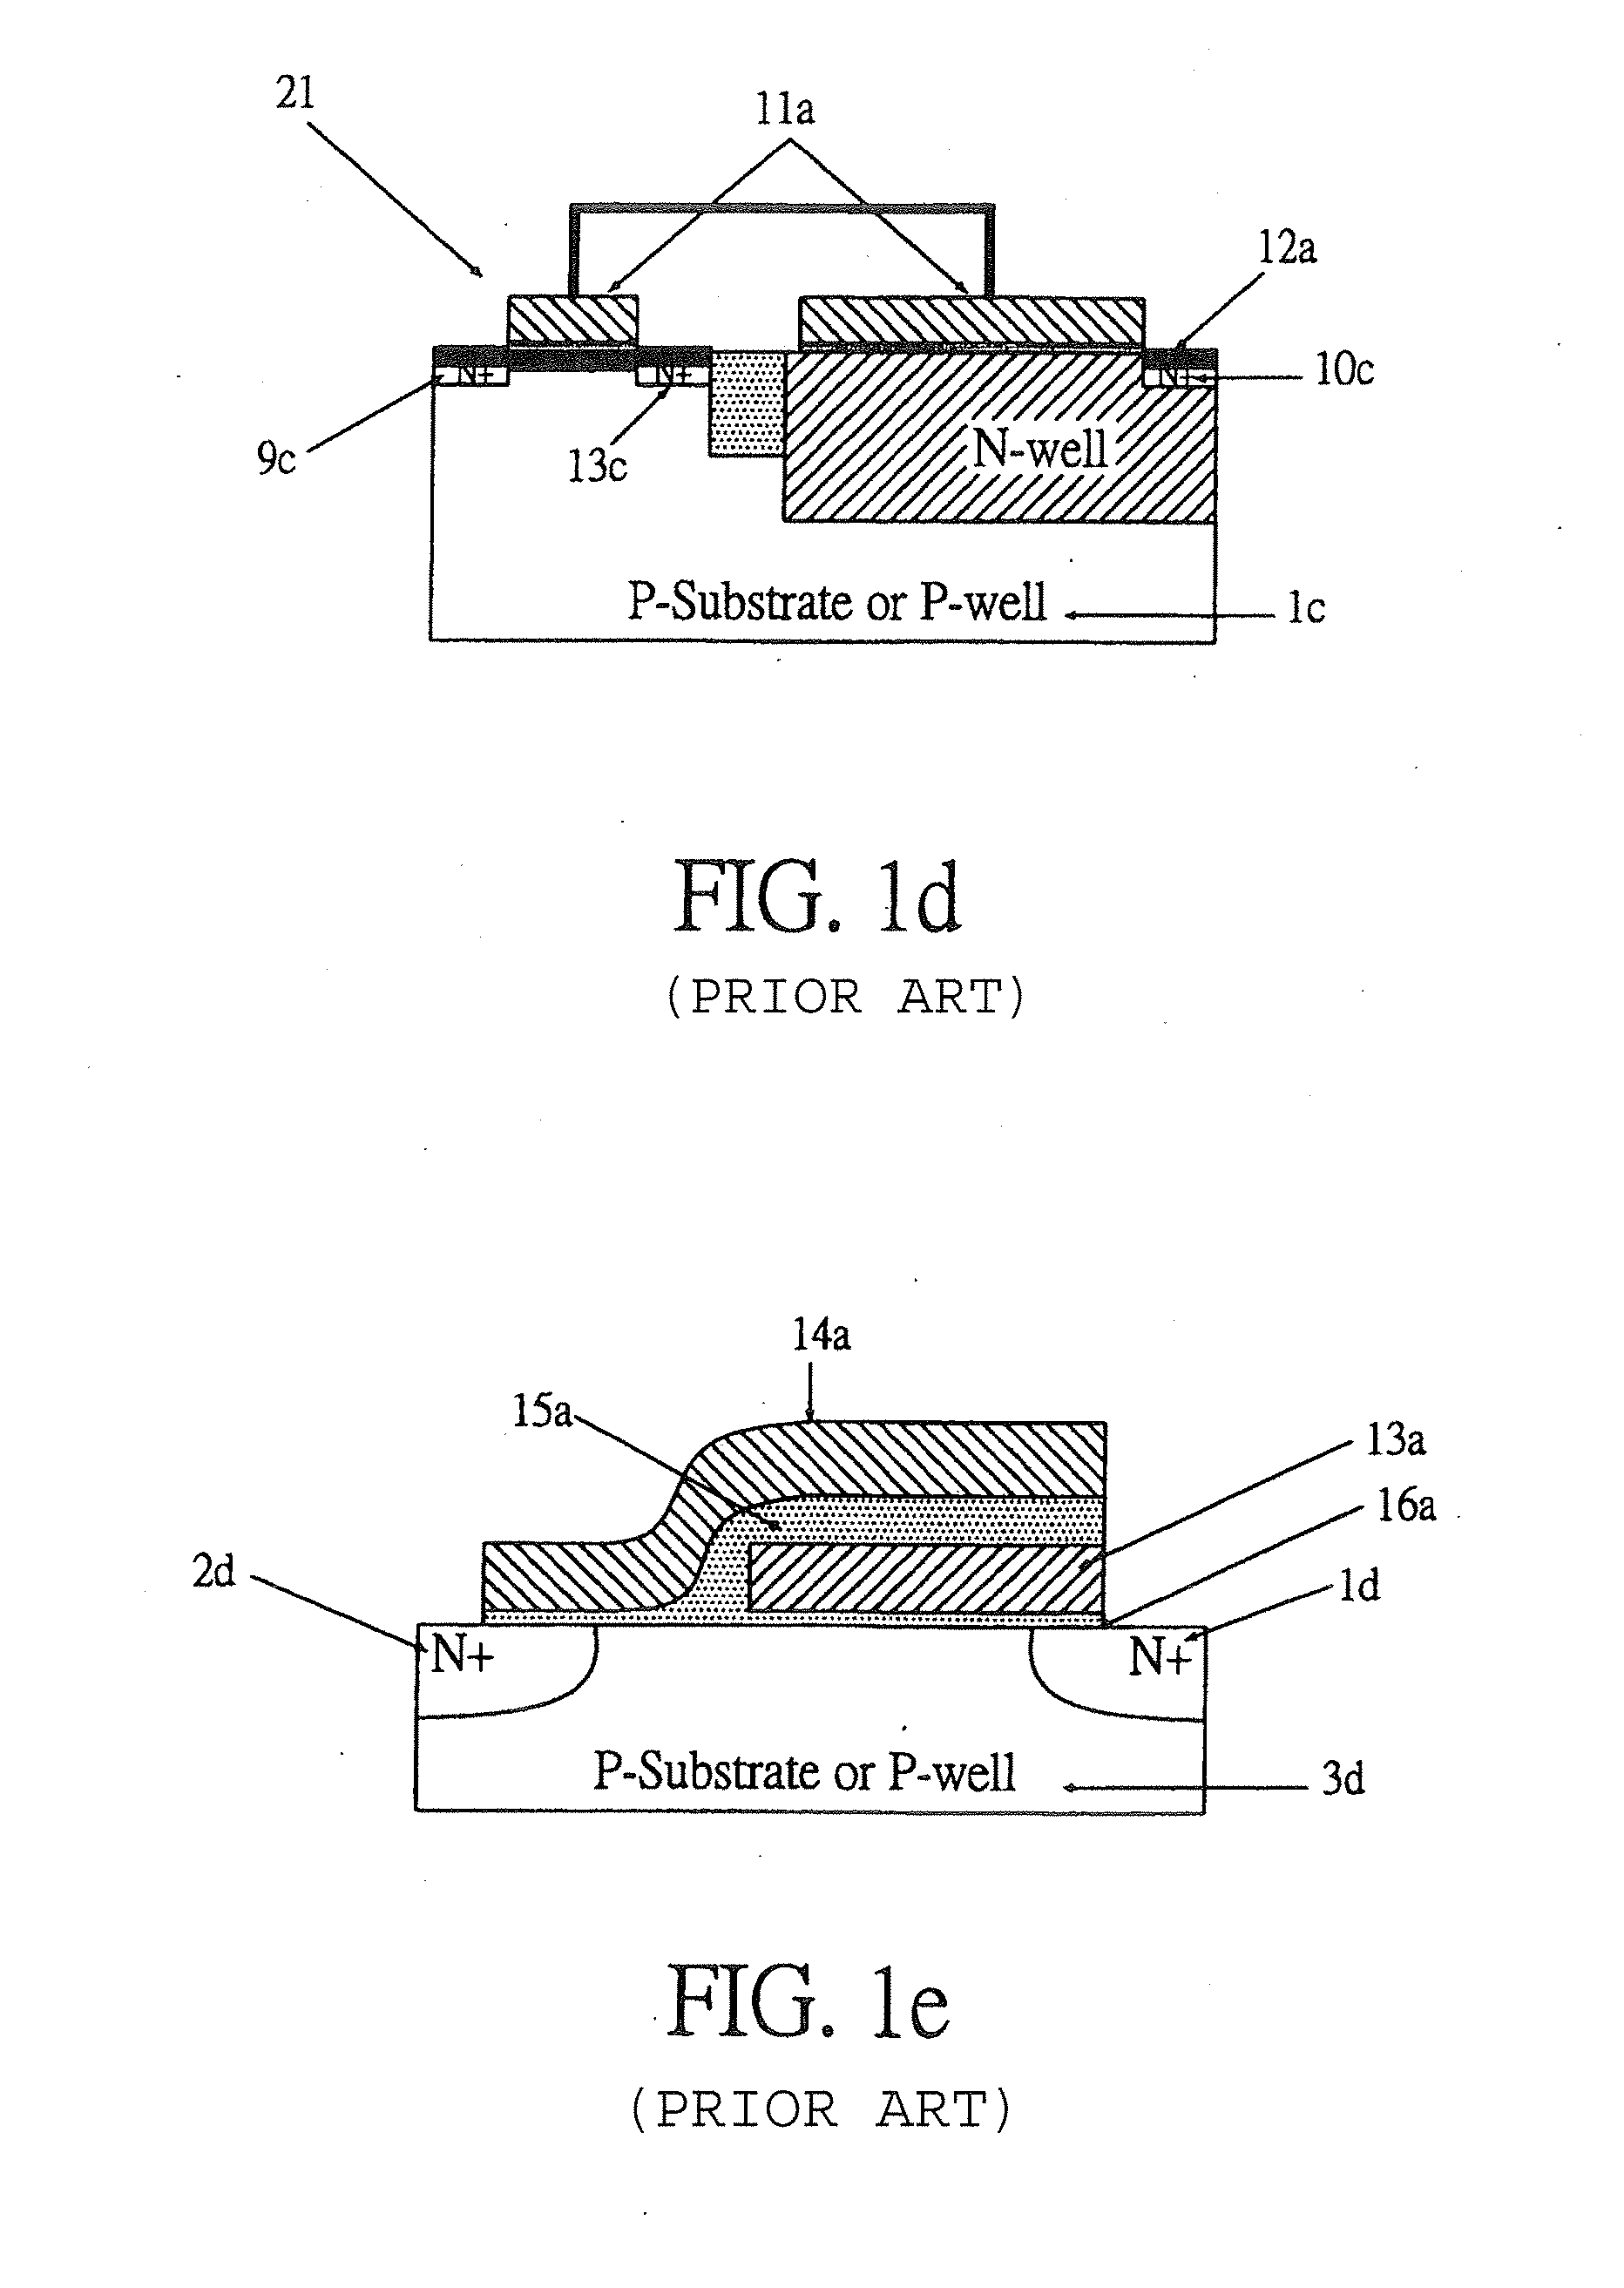 Structures and methods to store information representable by a multiple-bit binary word in electrically erasable, programmable read-only memory (eeprom)